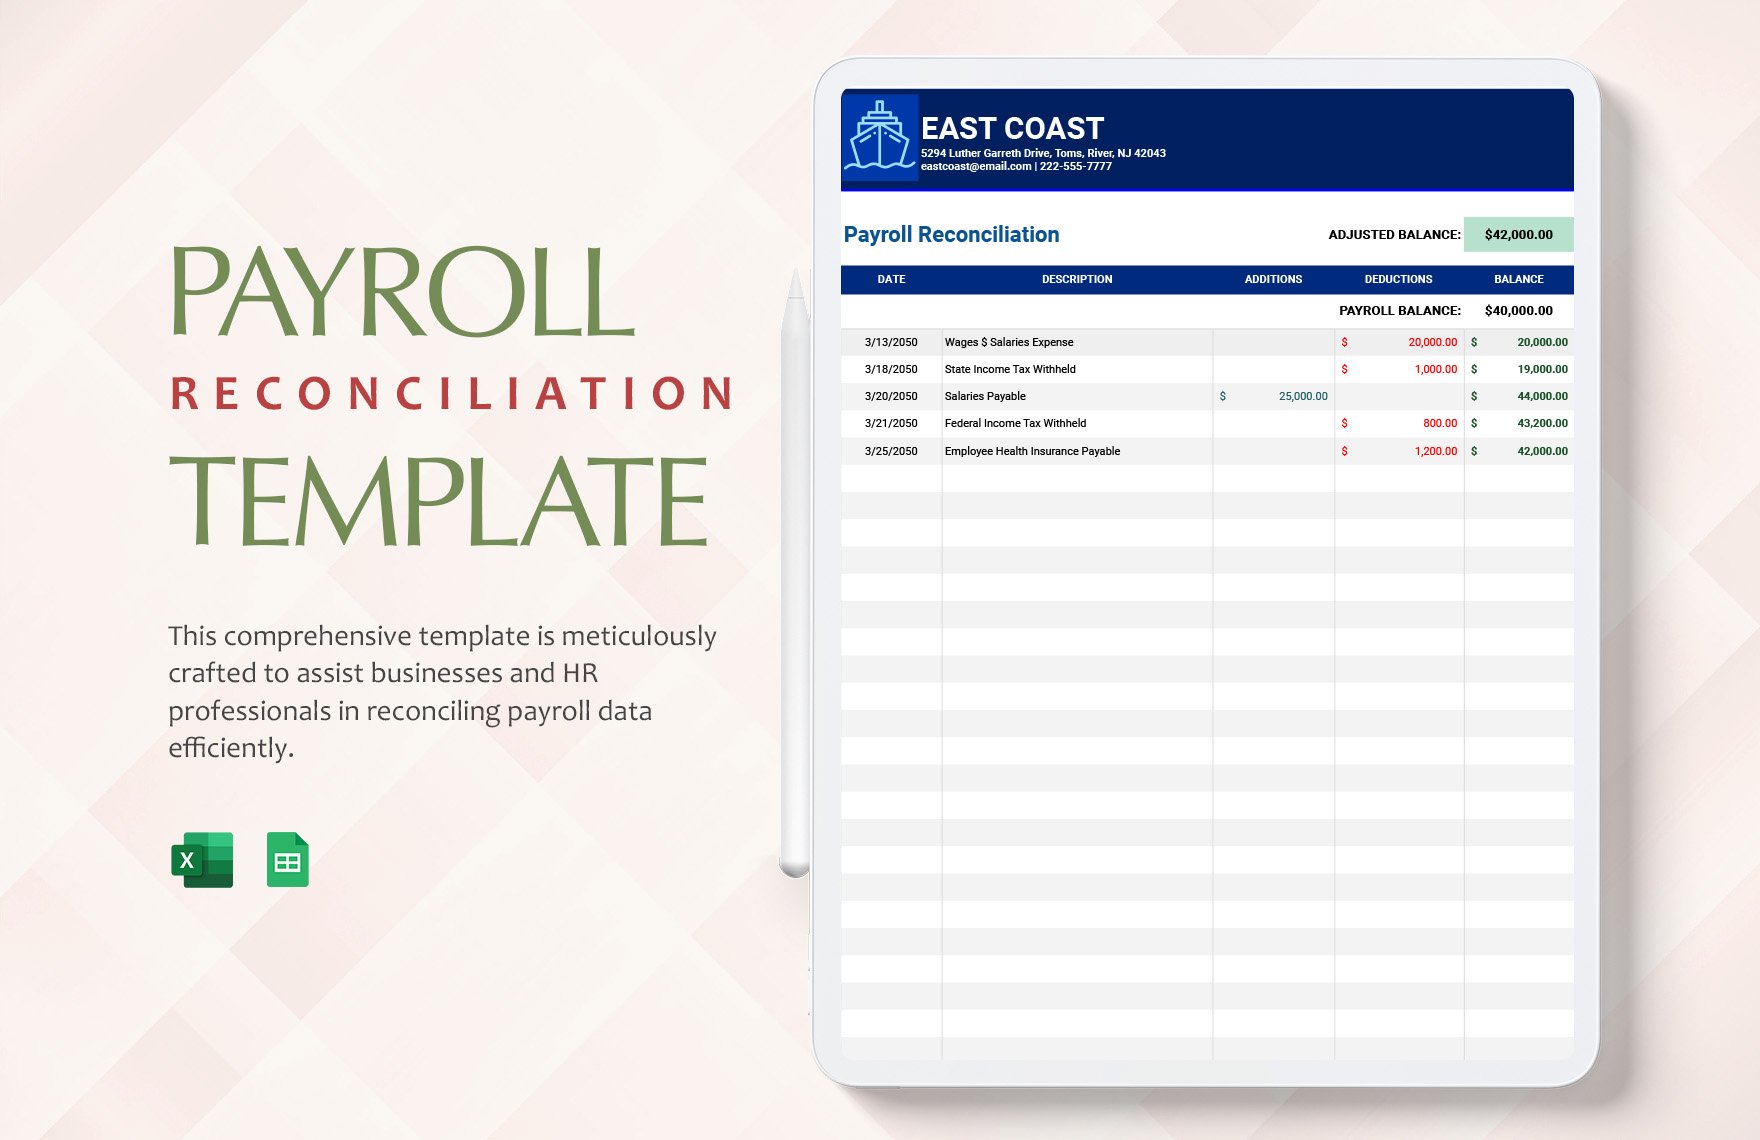 Payroll Reconciliation Template in Excel, Google Sheets